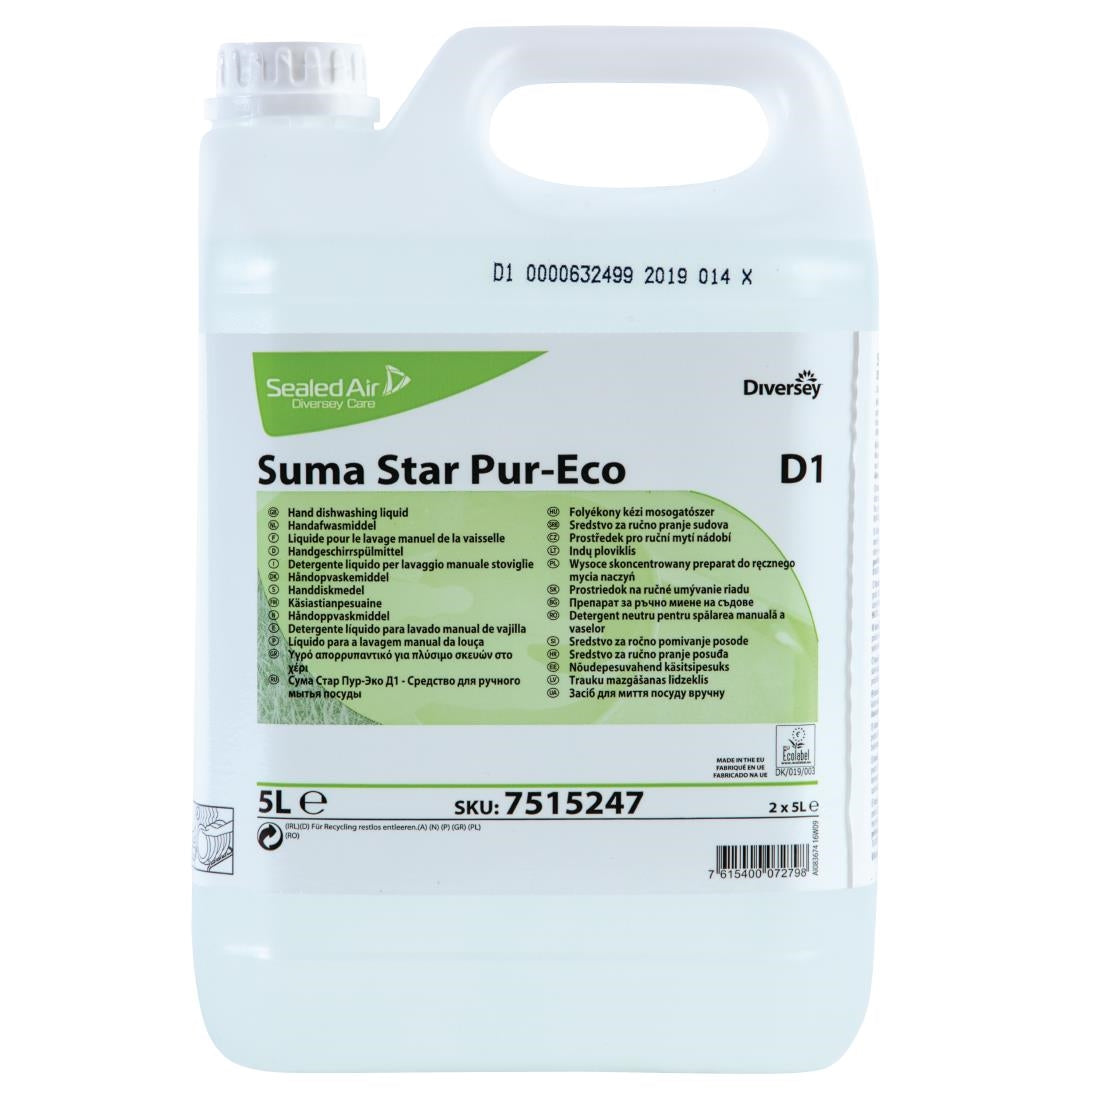 CX843 Suma Star D1 Pur-Eco Washing Up Liquid Concentrate 5Ltr JD Catering Equipment Solutions Ltd